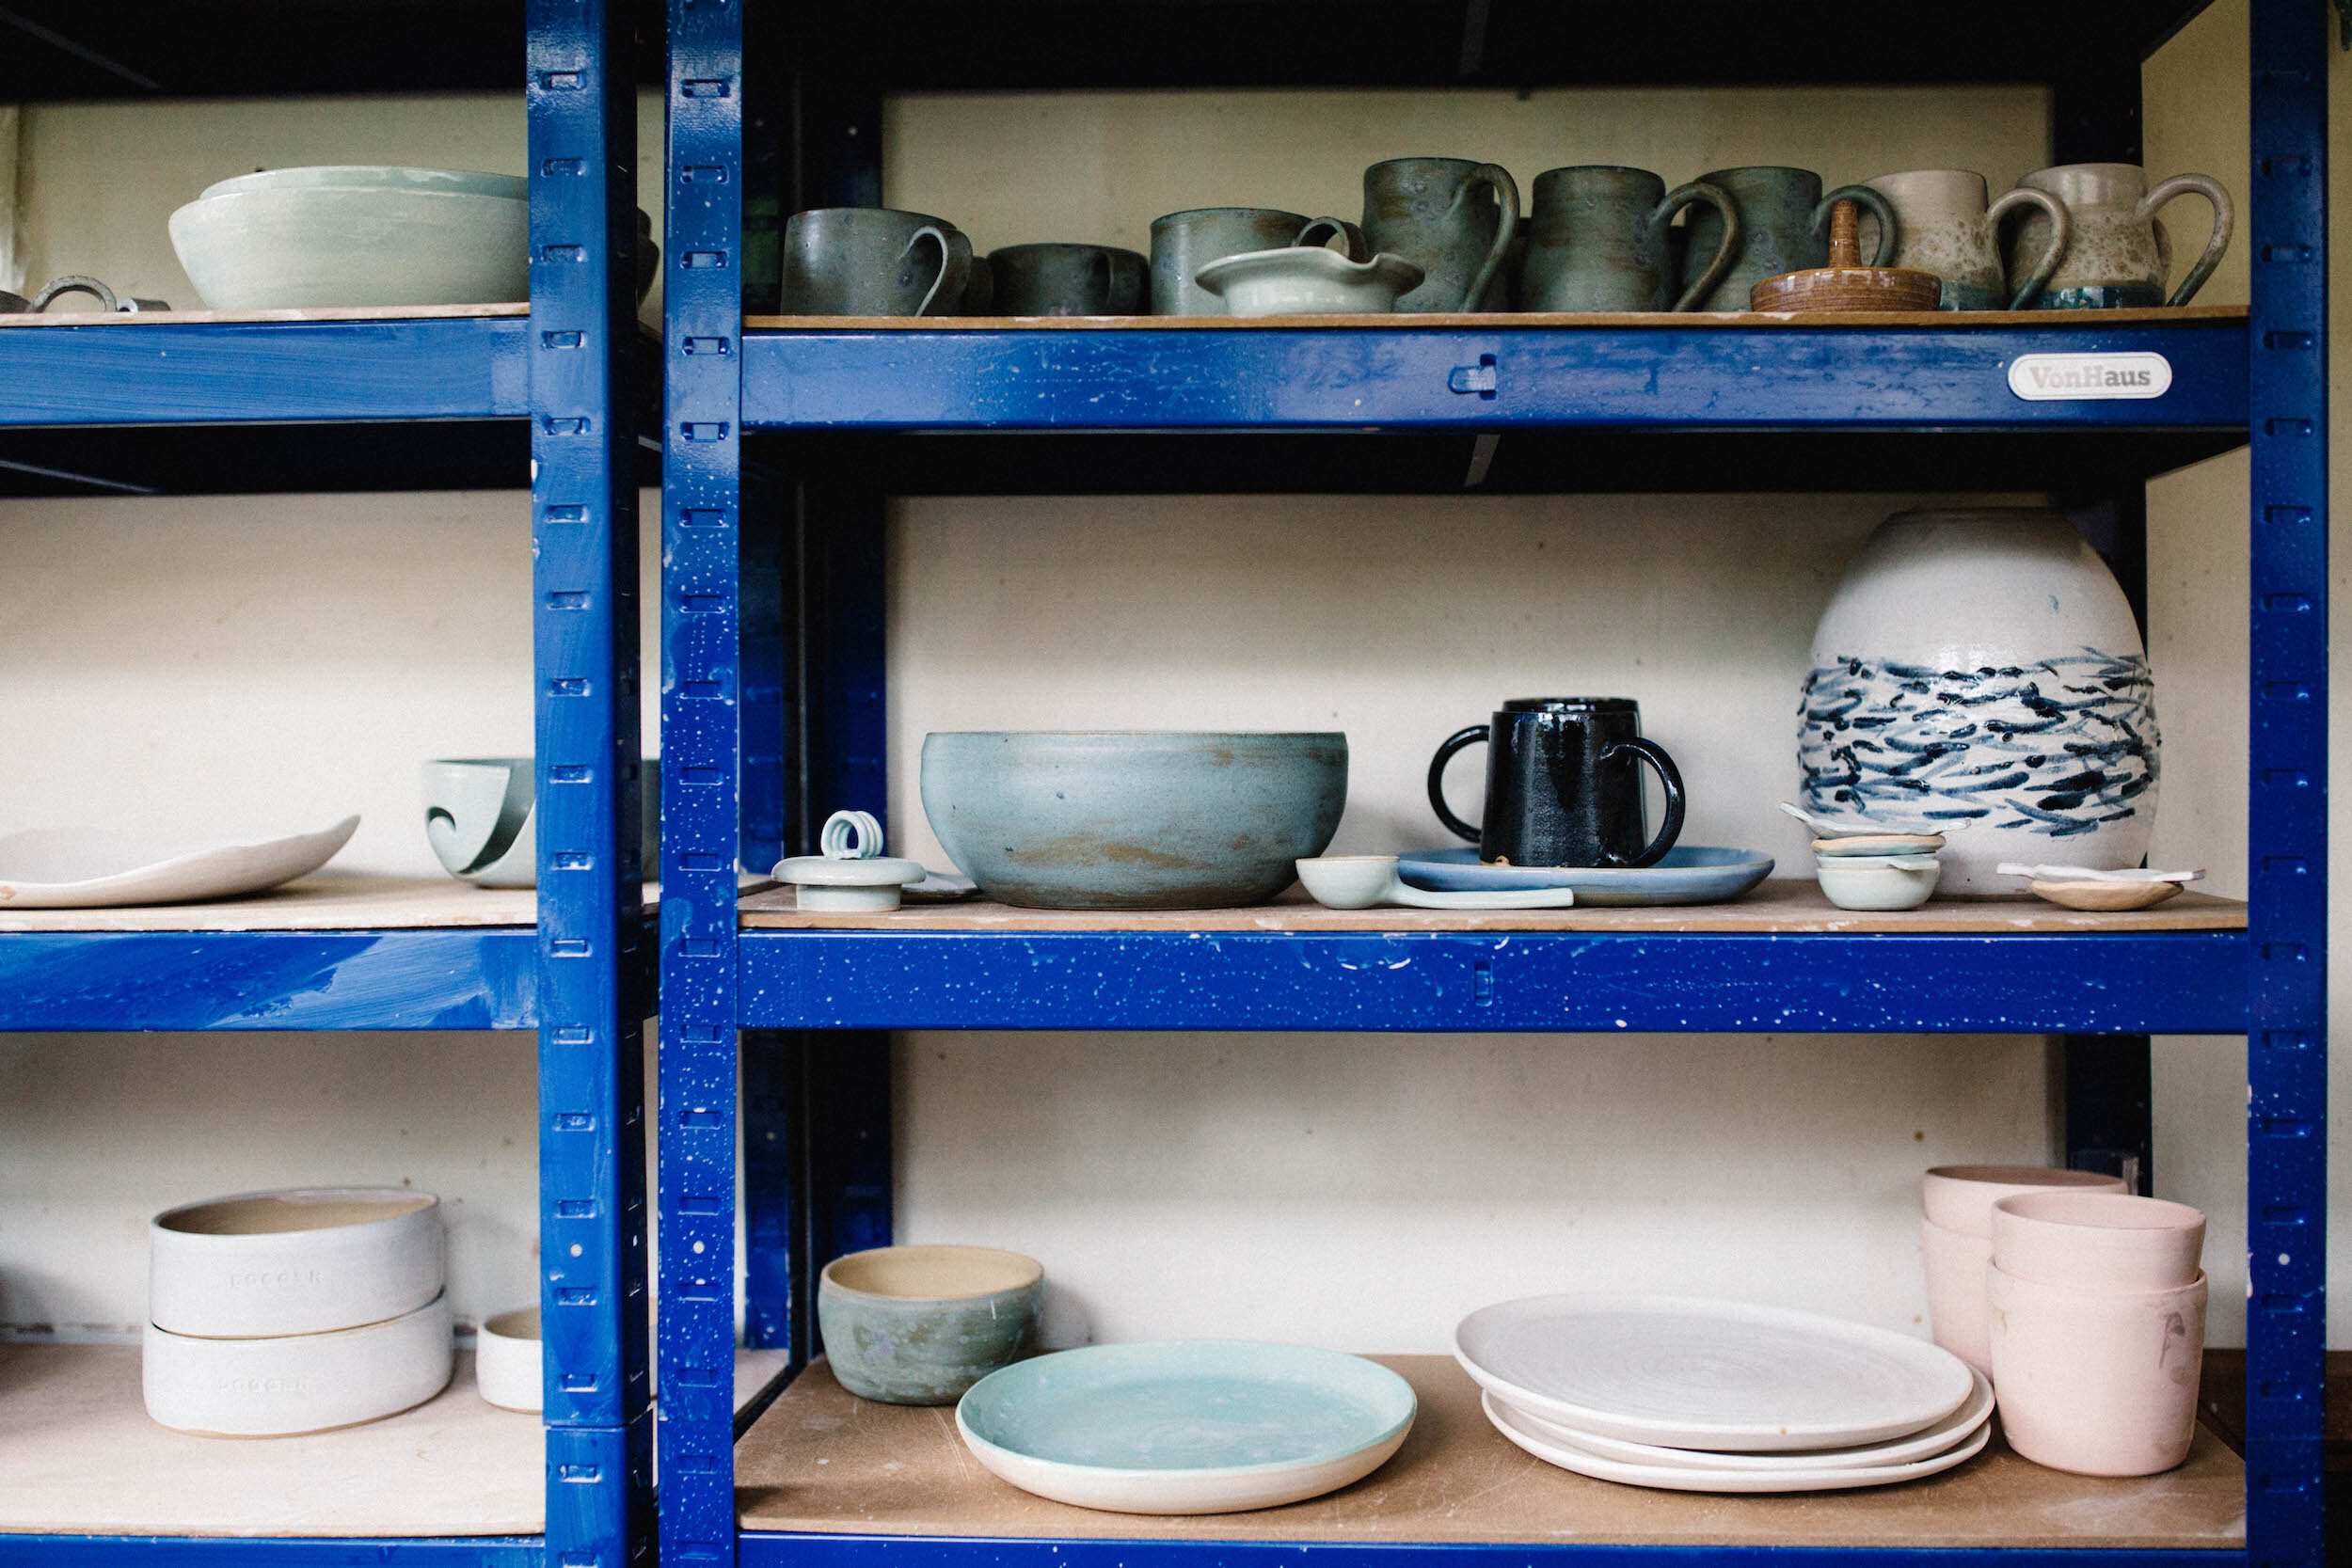 Make Pottery At Home Without a Kiln (Or Anything Else) 